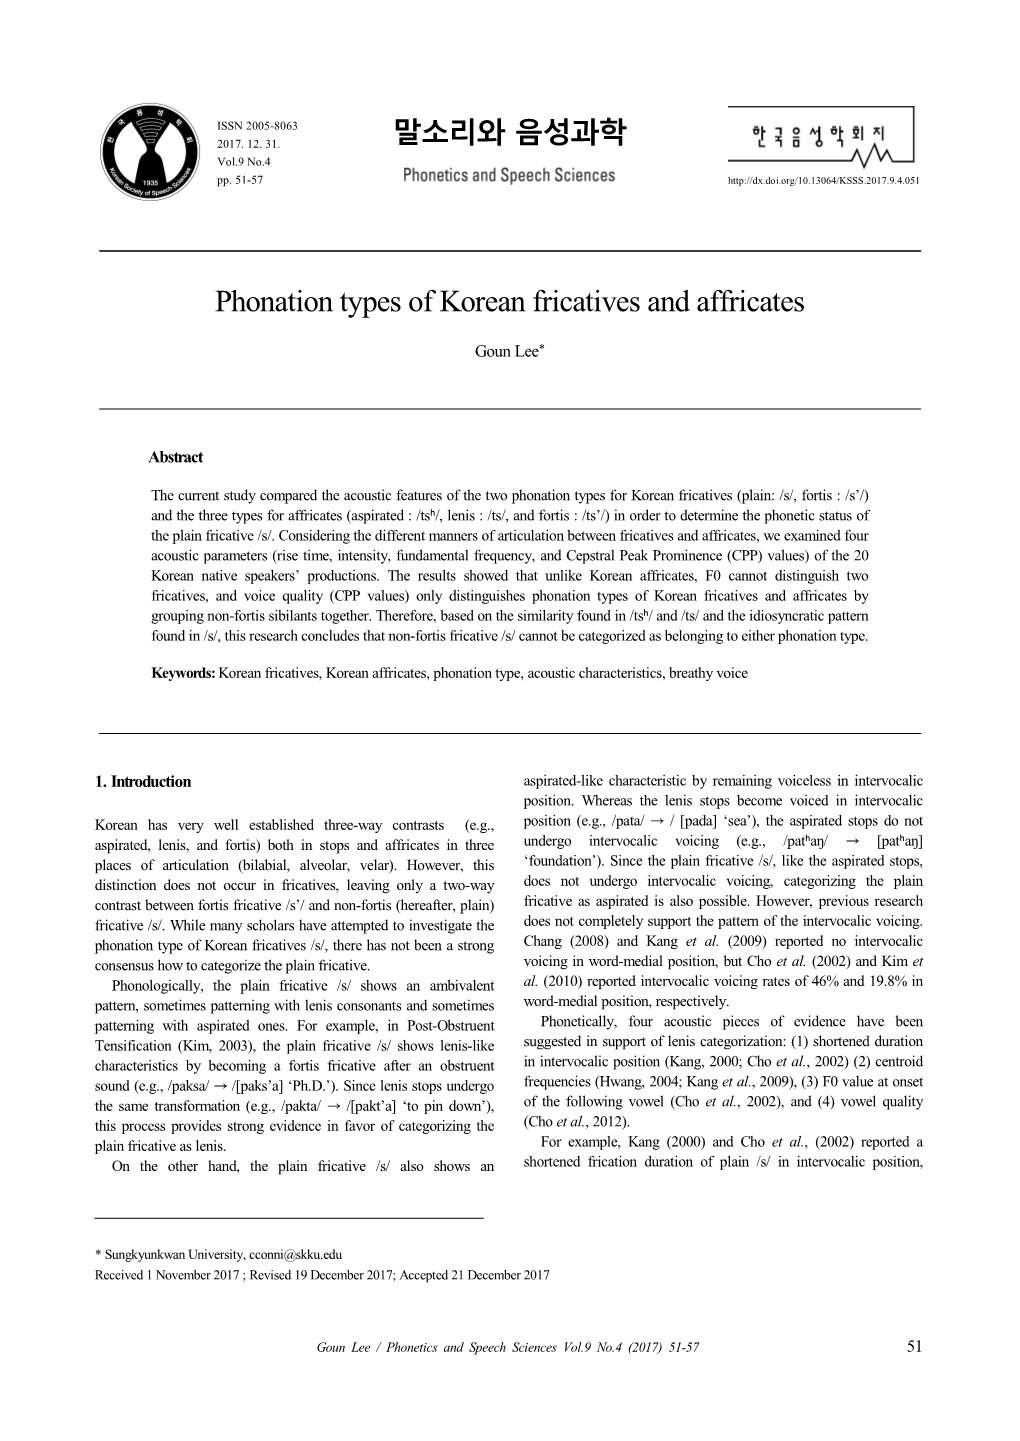 Phonation Types of Korean Fricatives and Affricates